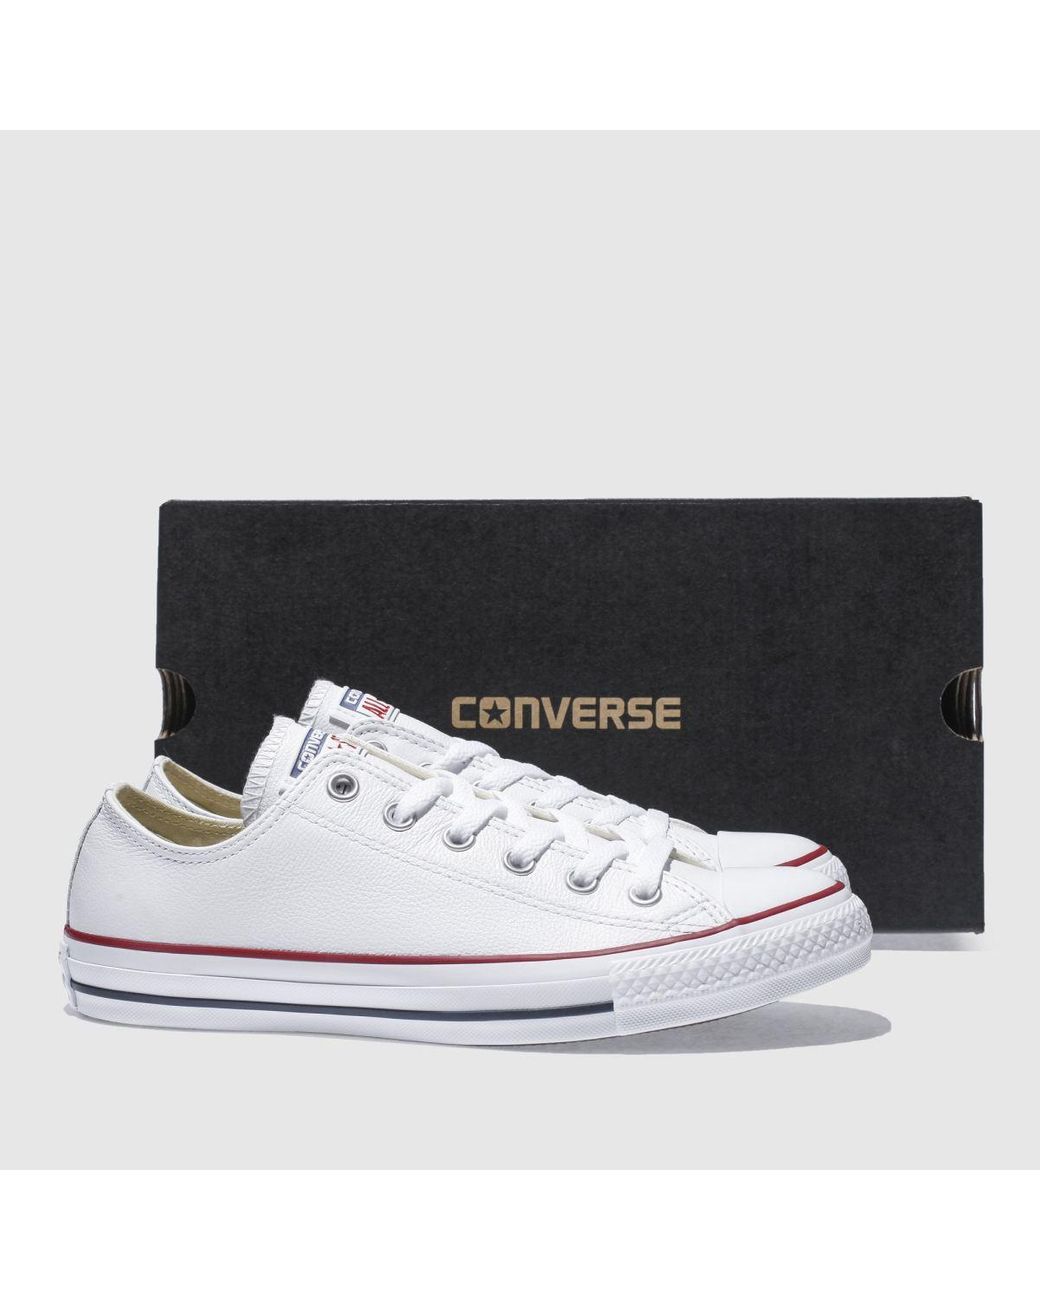 converse all star leather ox white